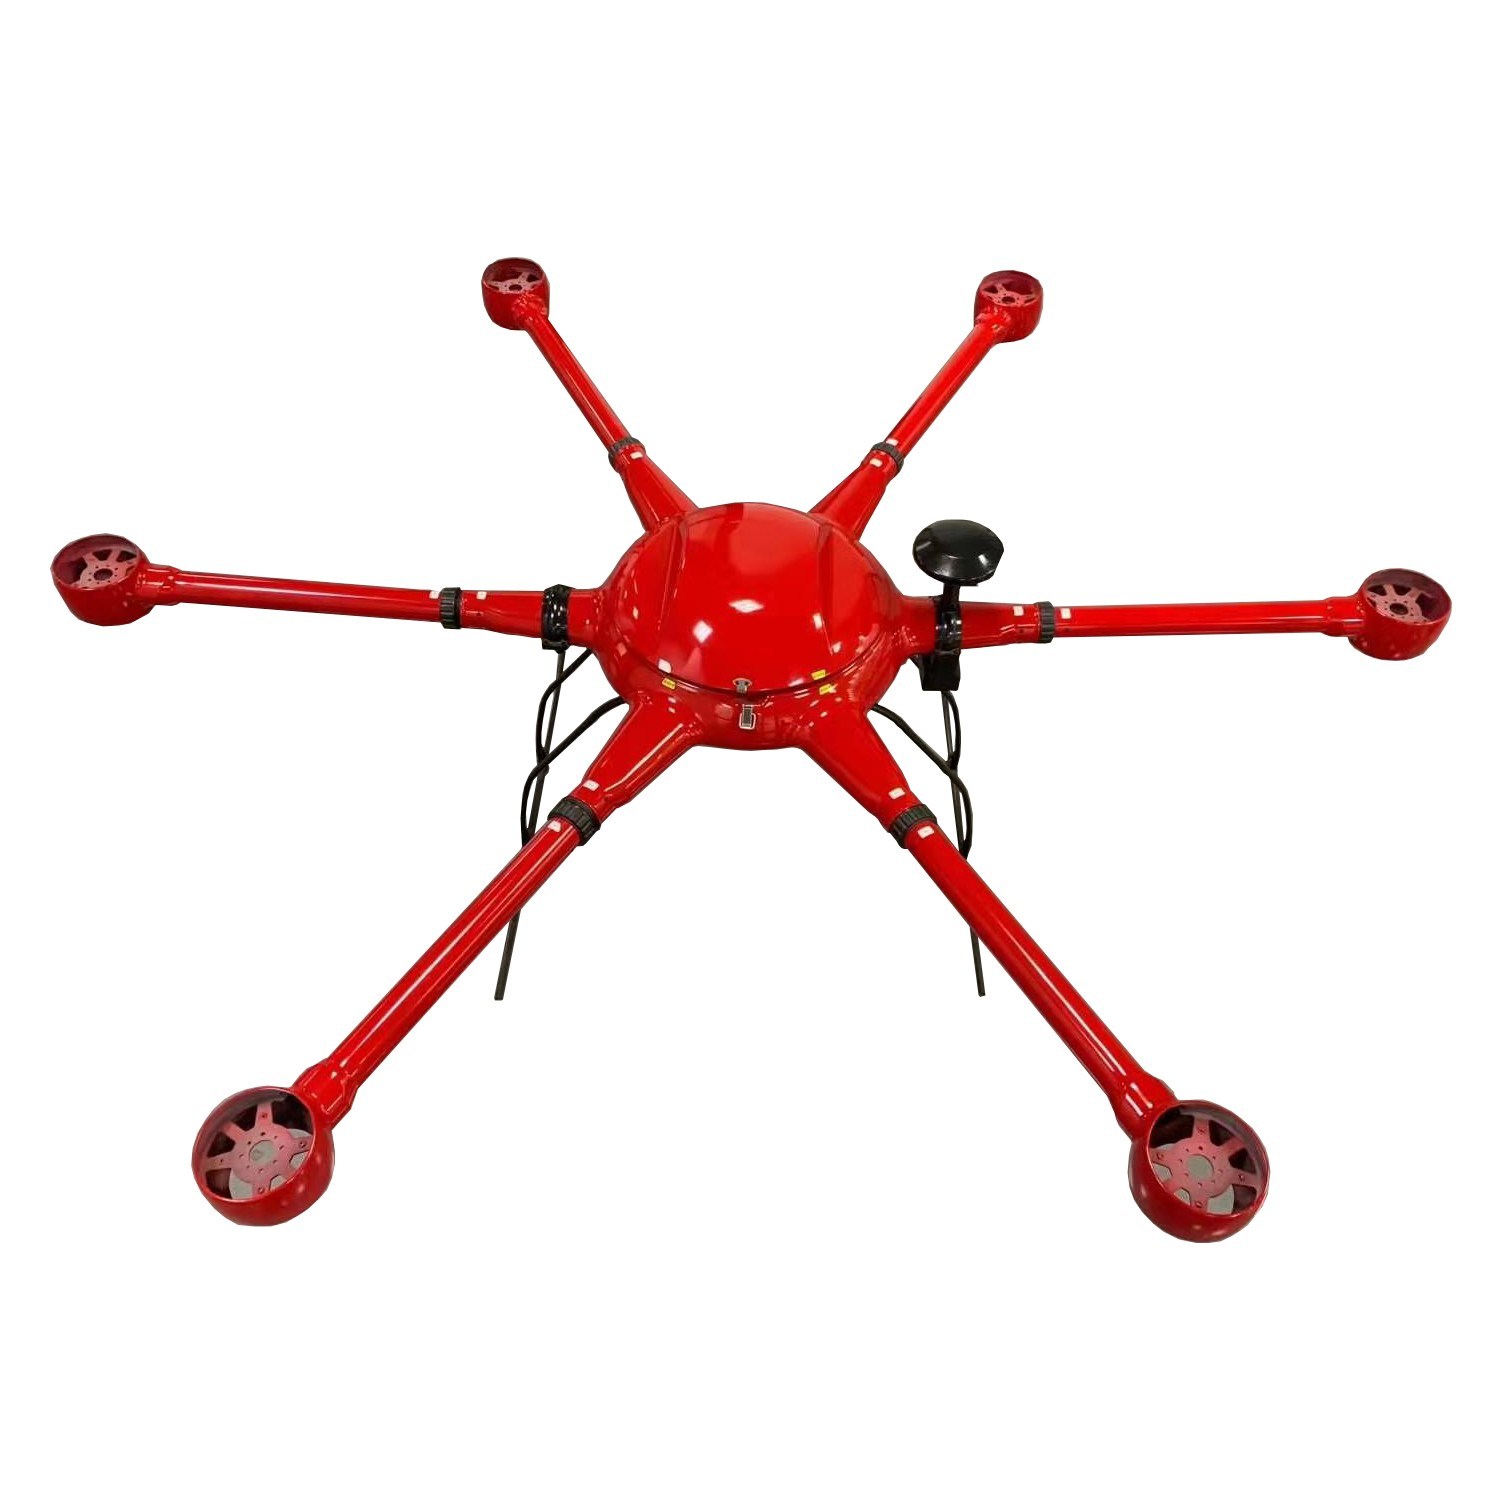 FD1550 industrial drone frame